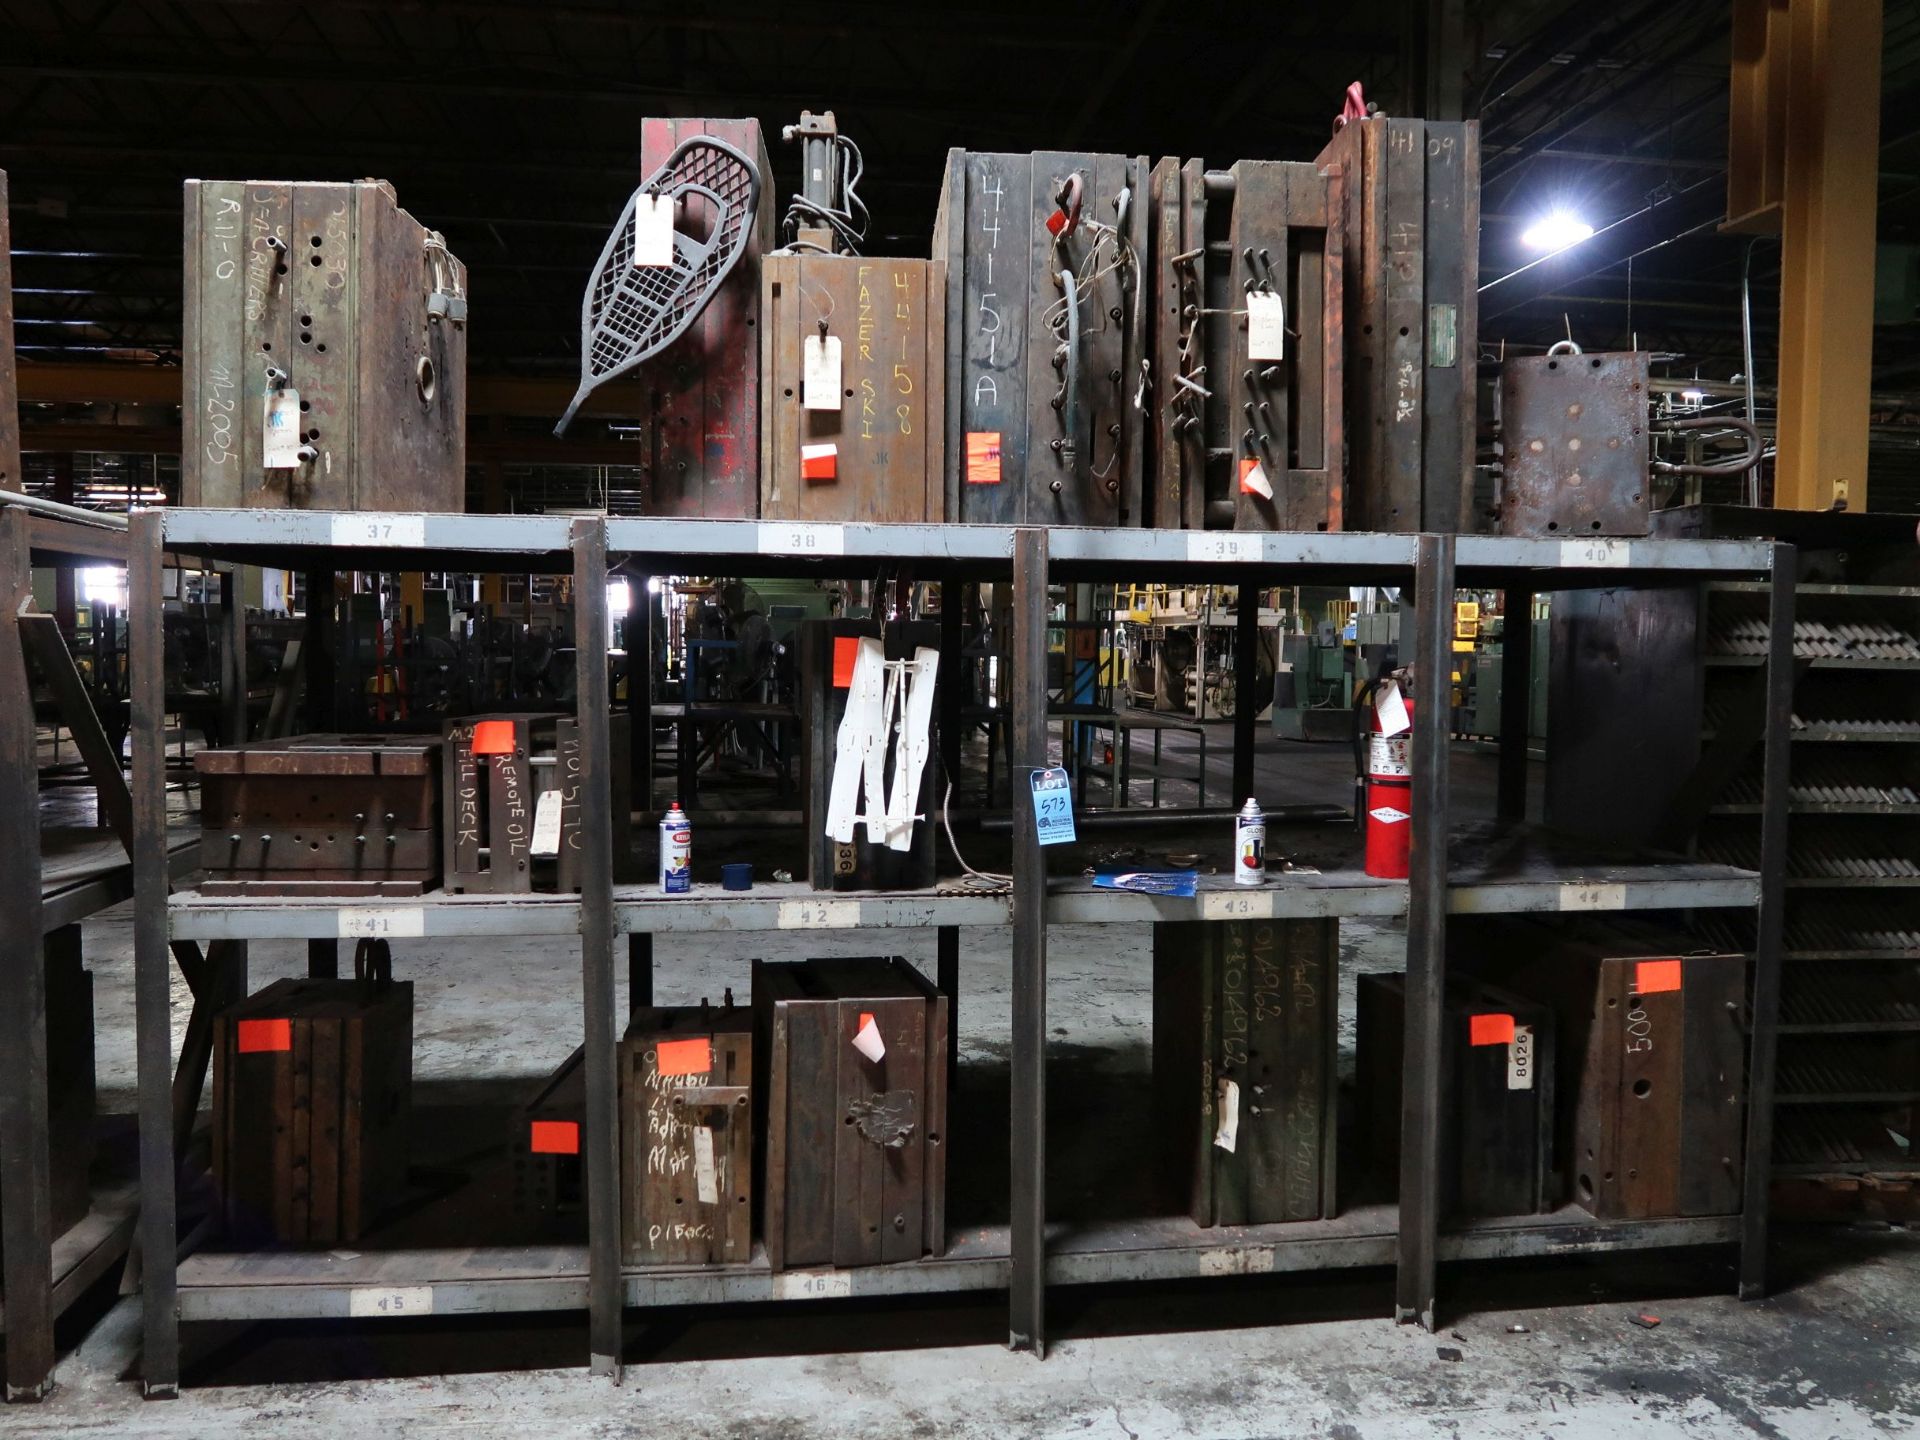 (LOT) RACK WITH (8) STEEL MOLDS - SOLD BY THE LOT